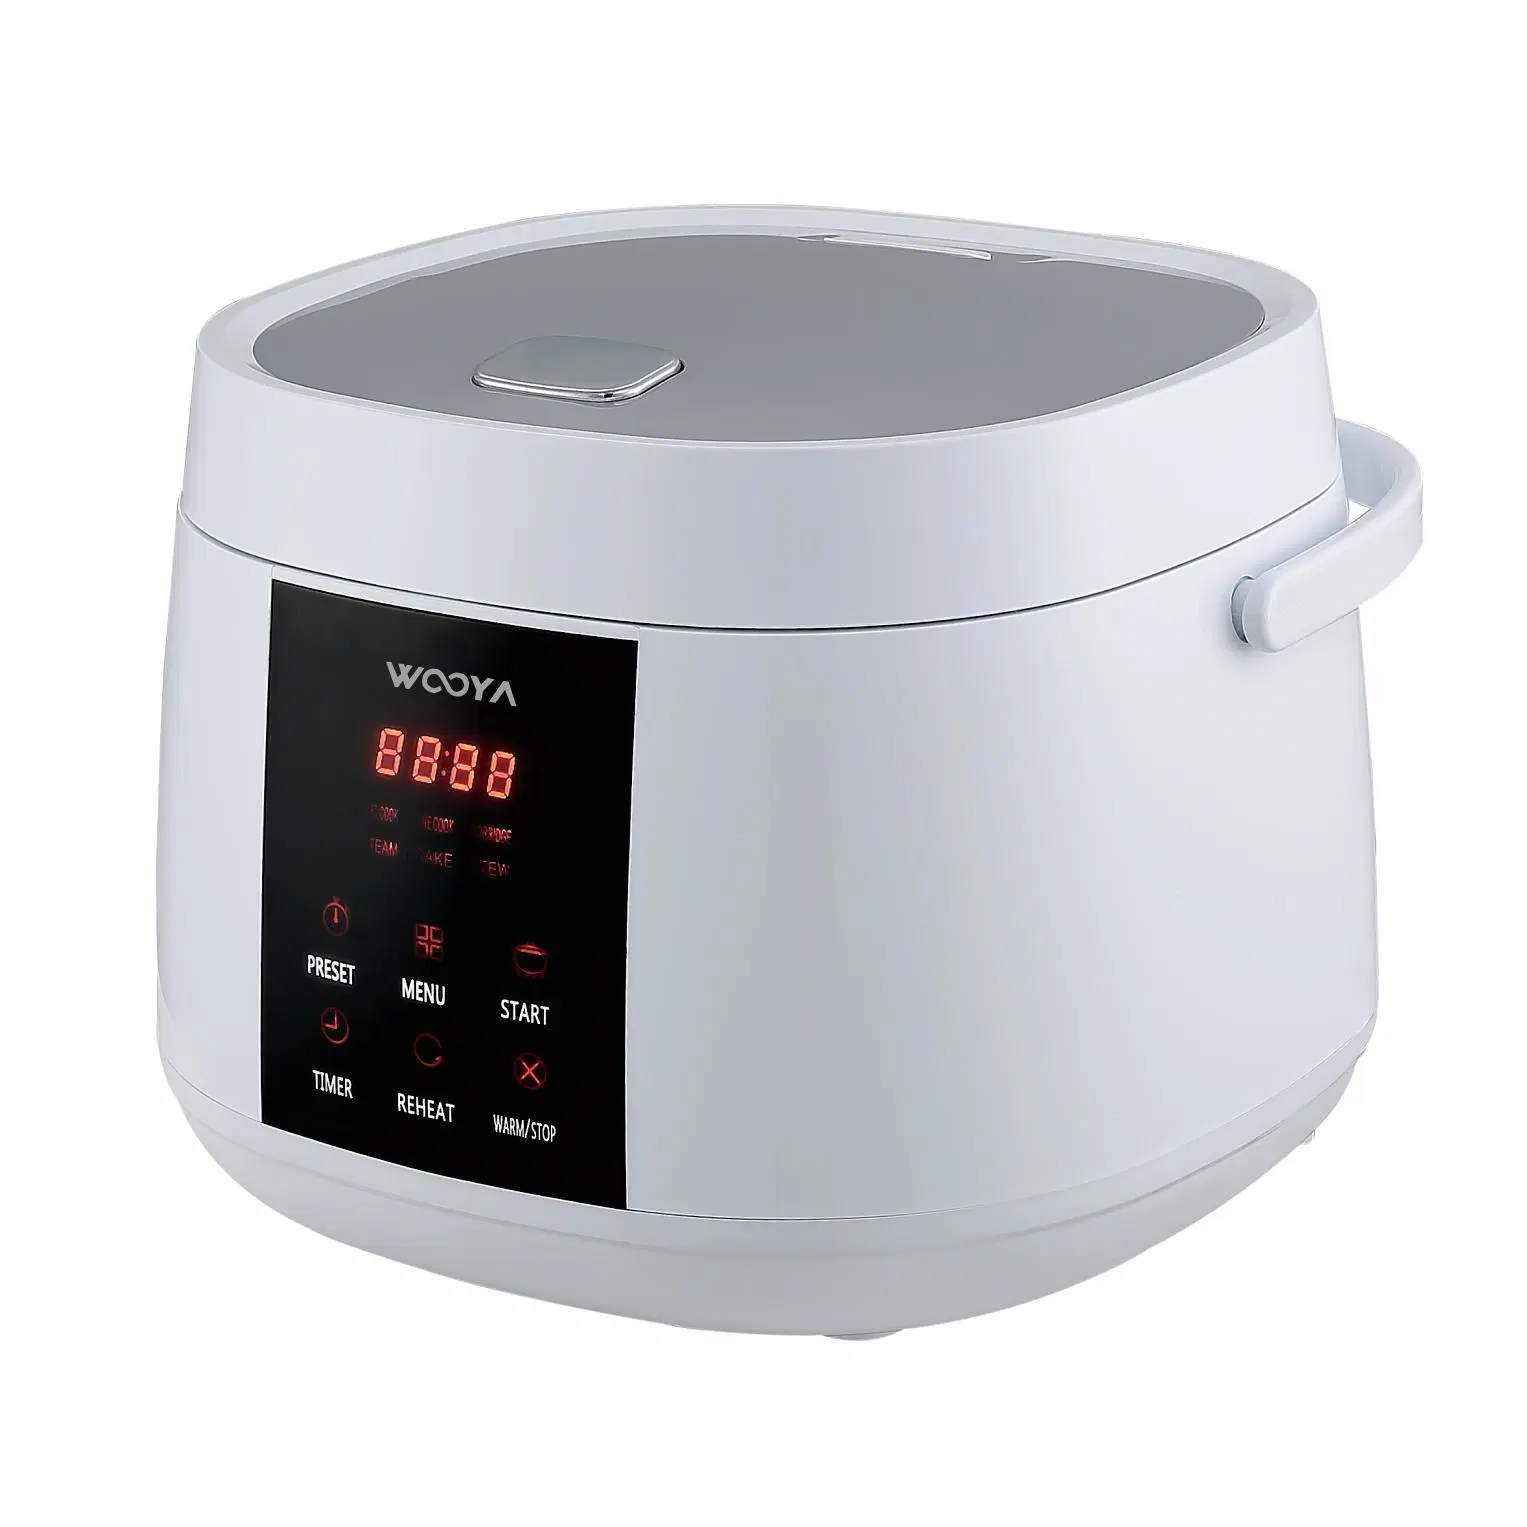 Programable Kitchen Appliance as Digital Rice Cooker Also for Soup, Cake